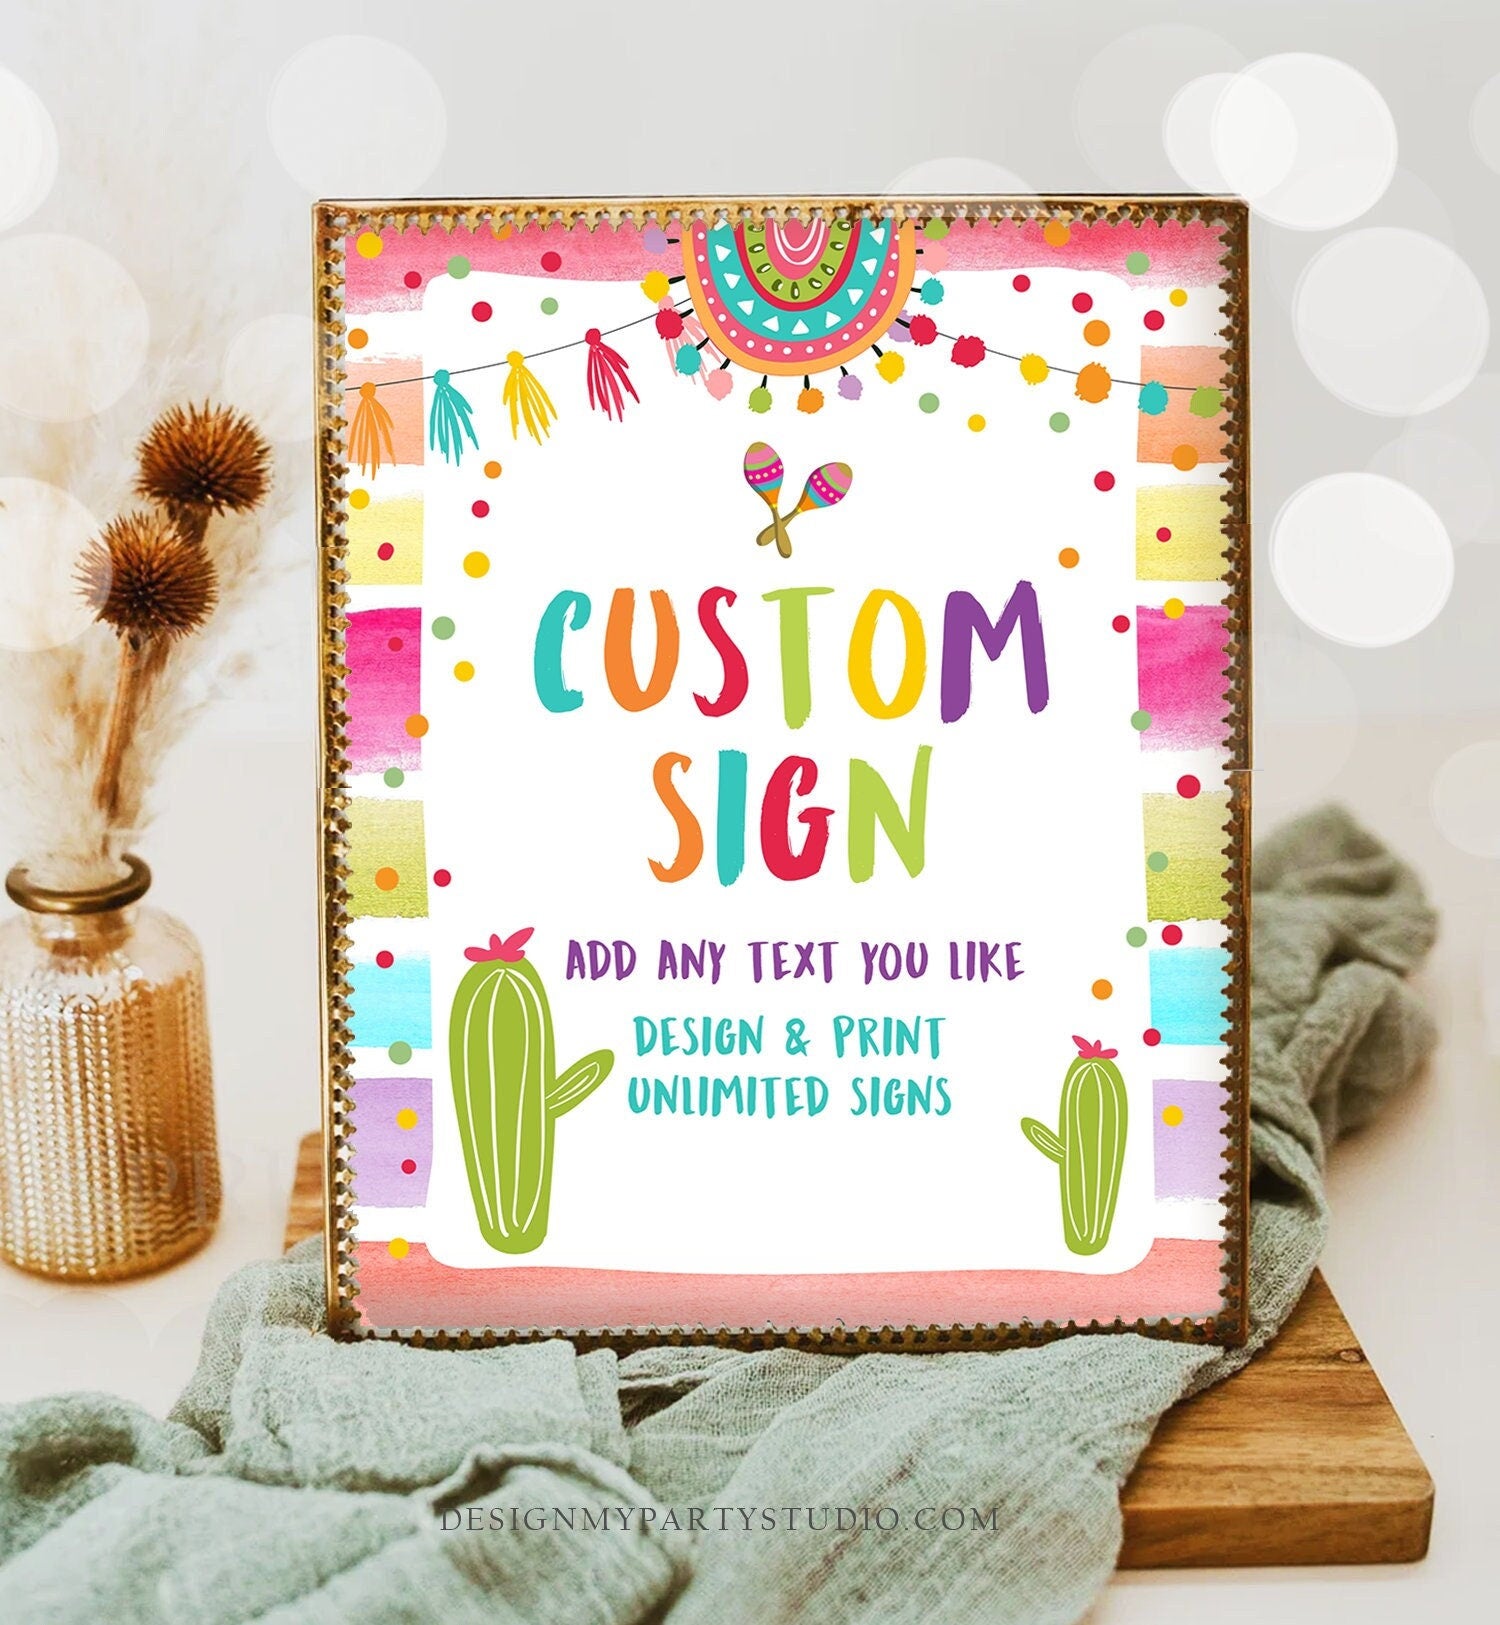 Editable Custom Sign Fiesta Cactus Sign Mexican Table Sign Decor Birthday Shower Party Taco Twosday Girl Download Printable Corjl 8x10 0134